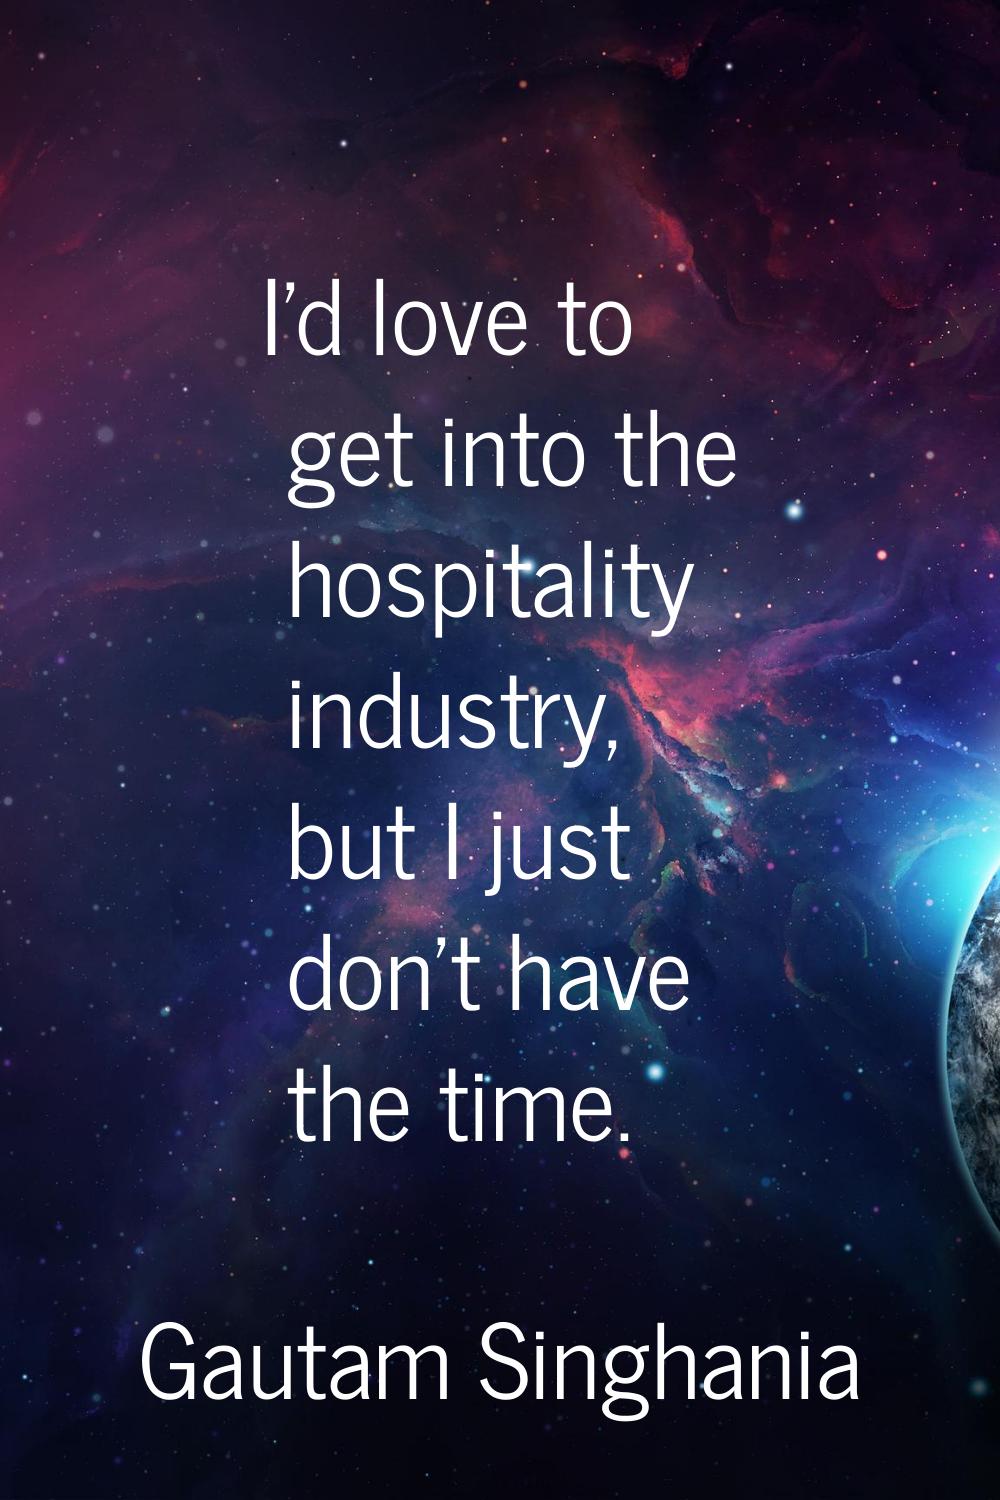 I'd love to get into the hospitality industry, but I just don't have the time.